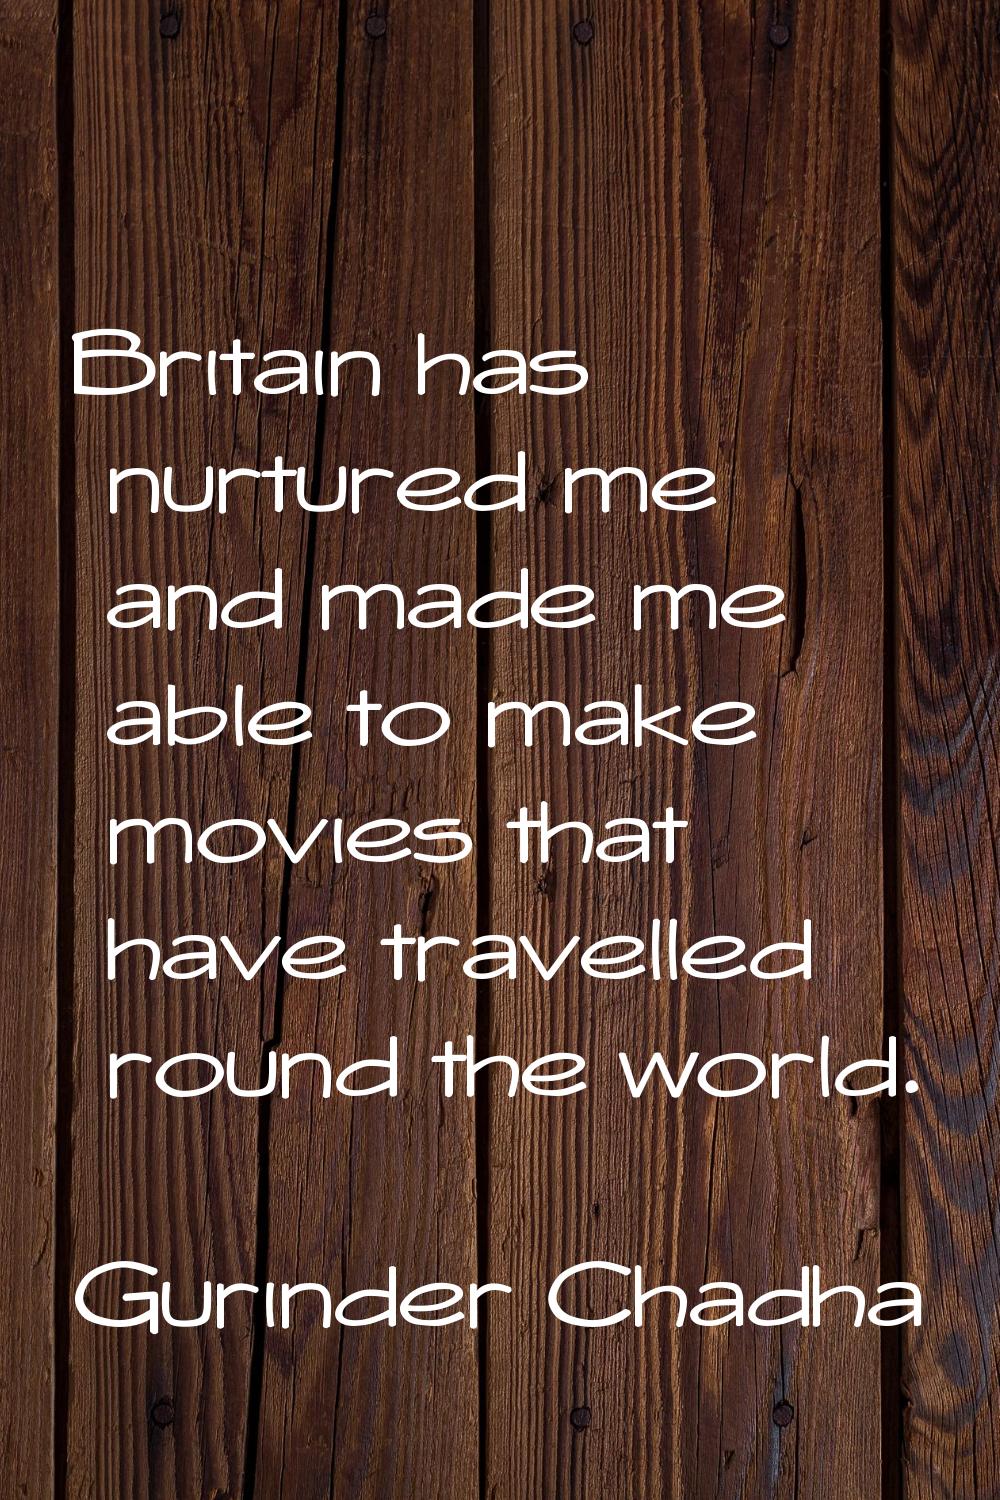 Britain has nurtured me and made me able to make movies that have travelled round the world.